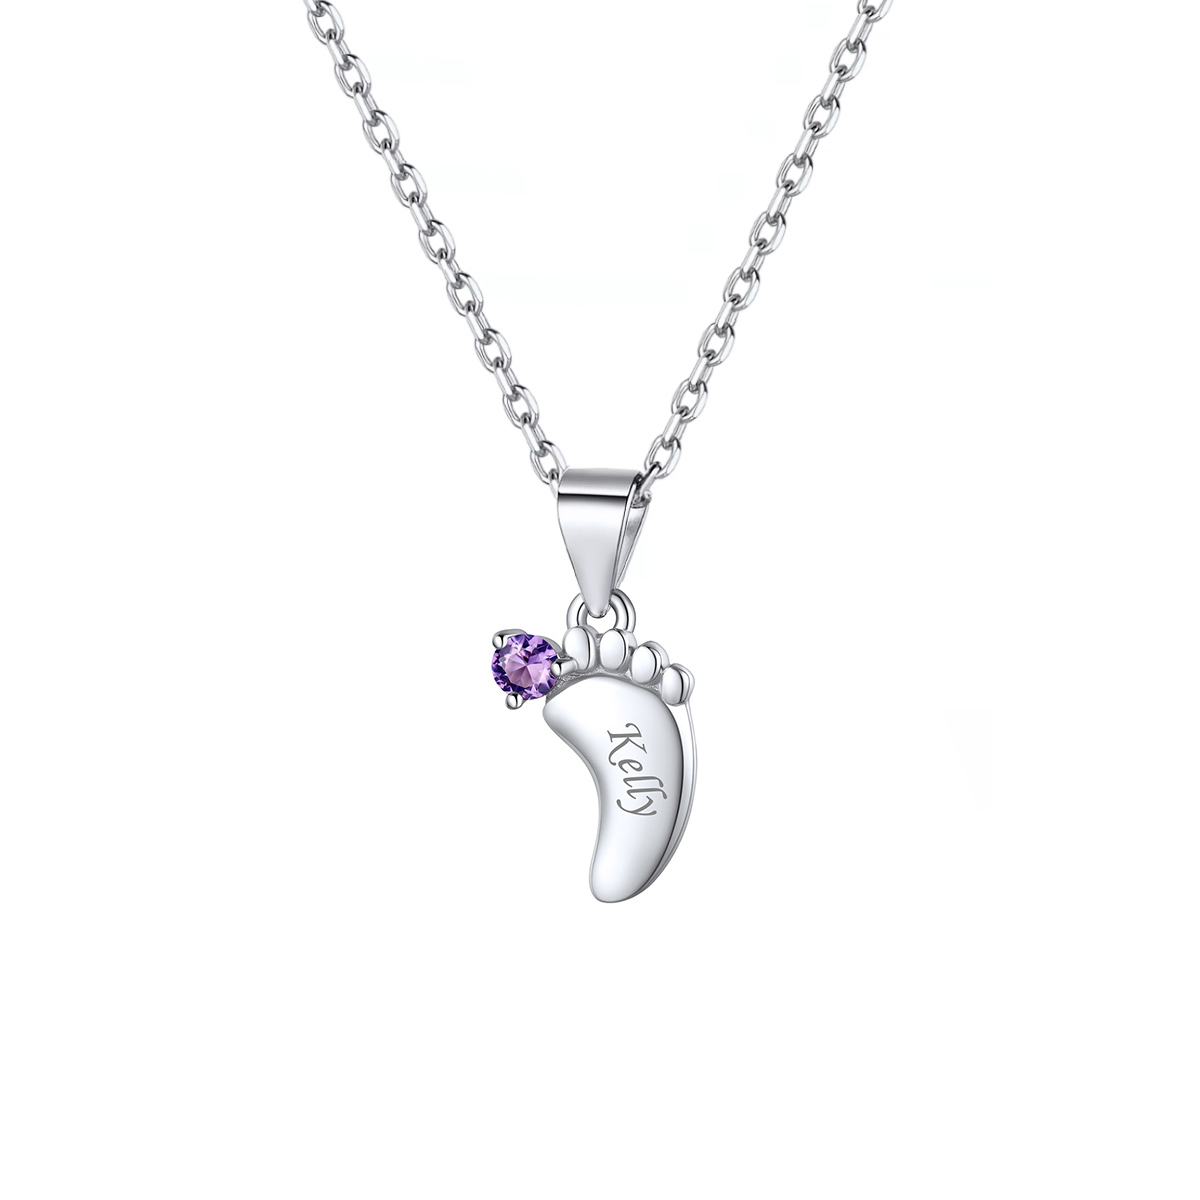 ChicSilver Baby Feet Name Necklace With Birthstone For Mother Sterling Silver